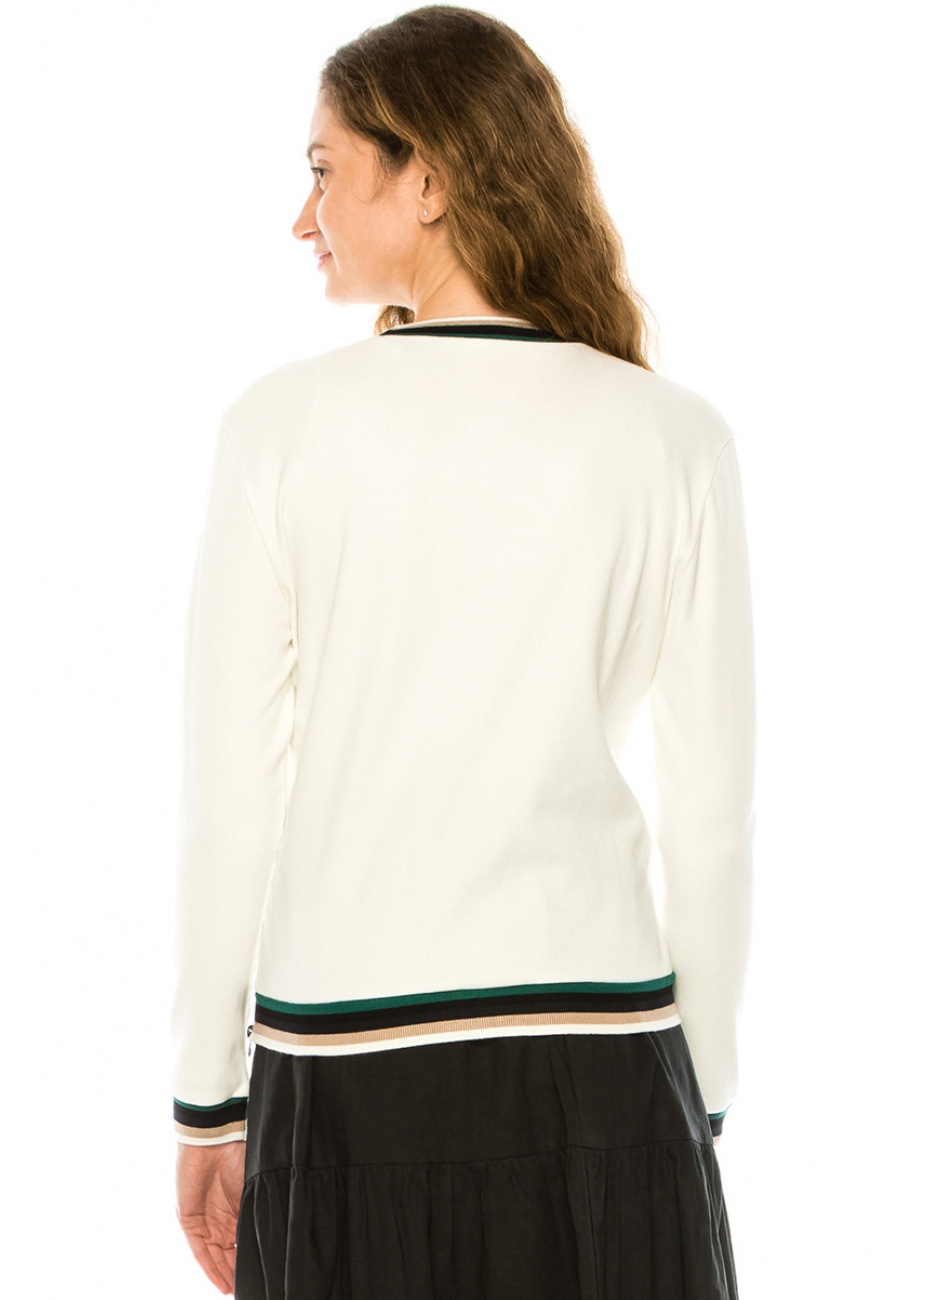 White Long Sleeve T-Shirt With Side Zipper